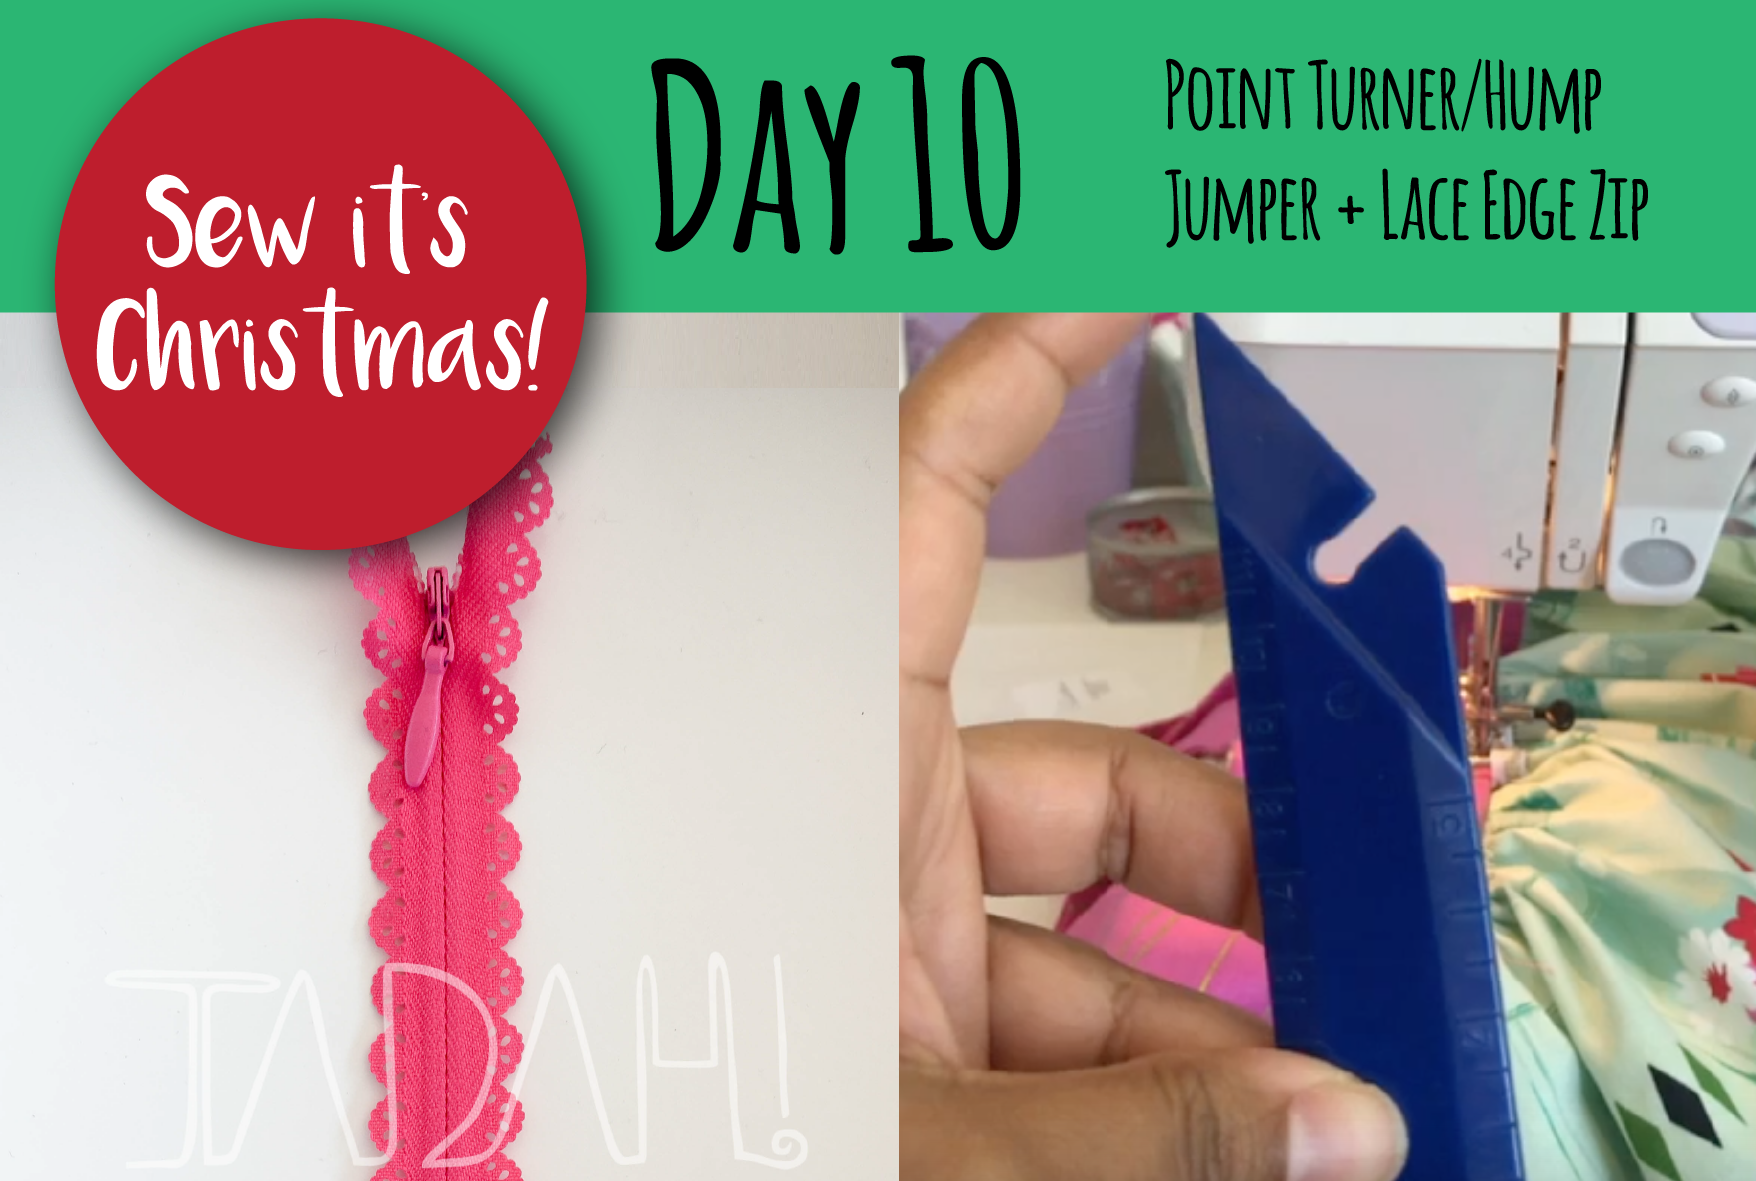 SEW IT'S CHRISTMAS - Day 10: Point Turner/Hump Jumper + Lace Zips